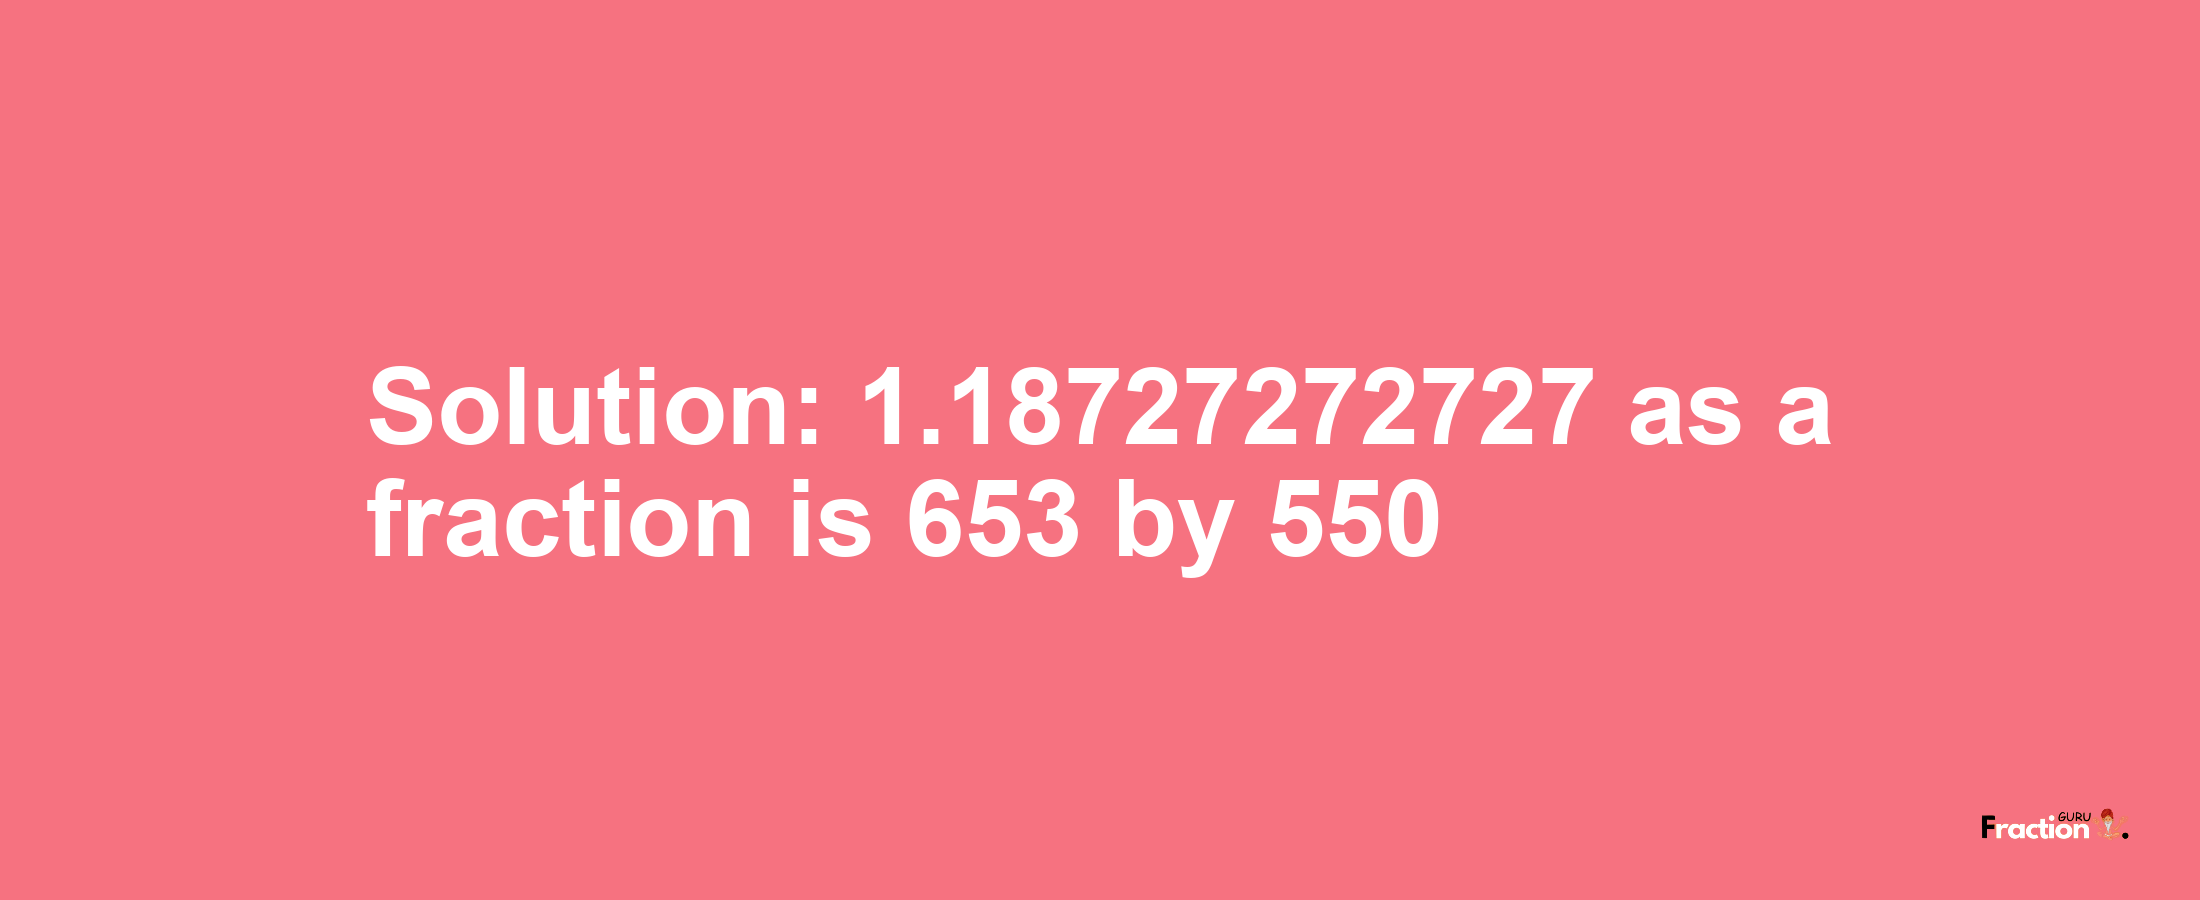 Solution:1.18727272727 as a fraction is 653/550